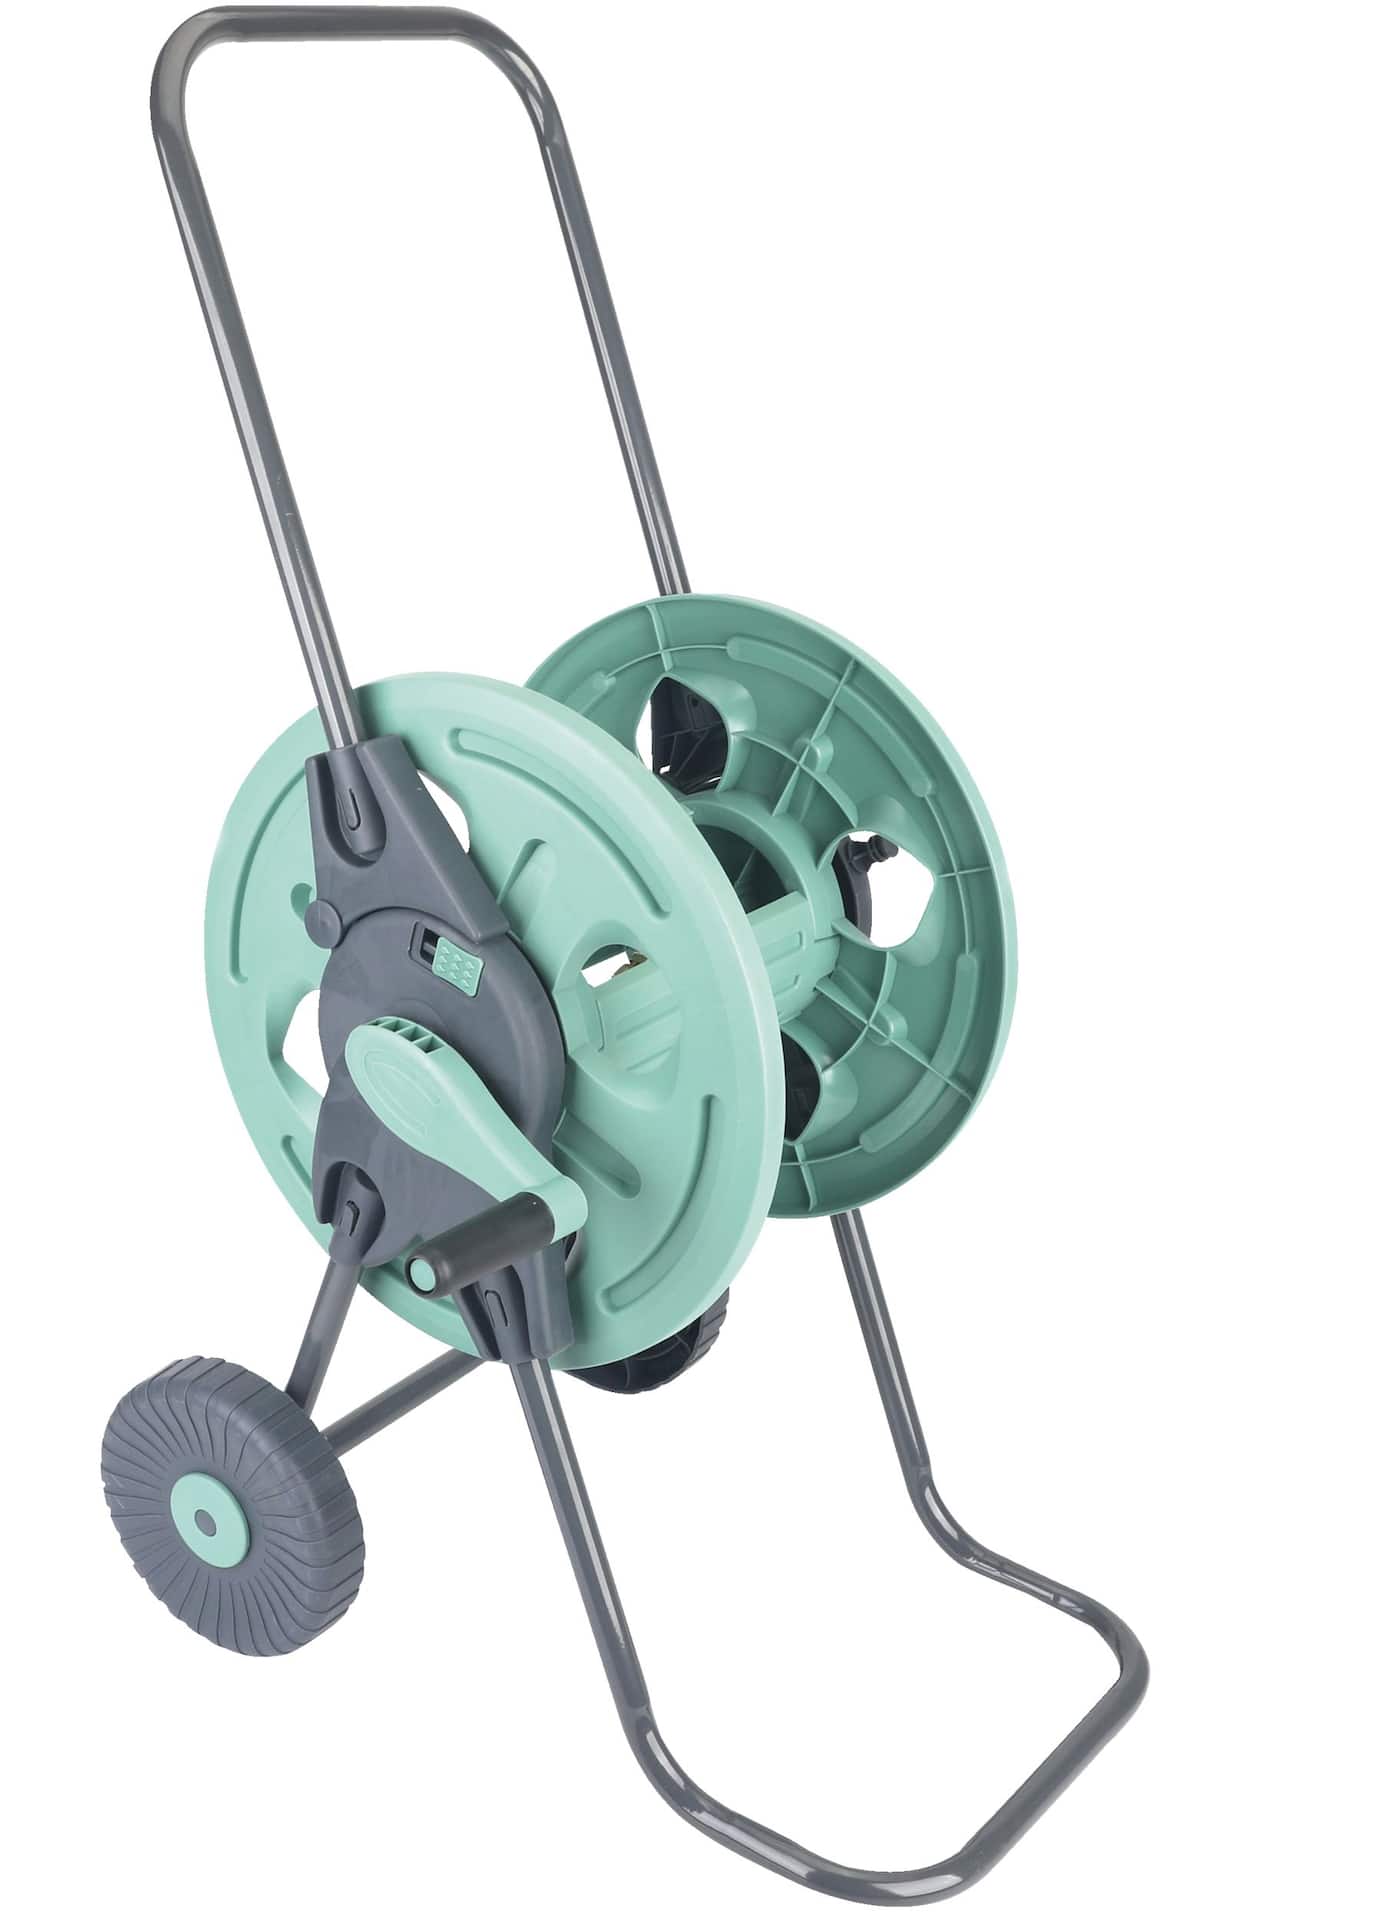 Utility twin hose reel for Gardens & Irrigation 